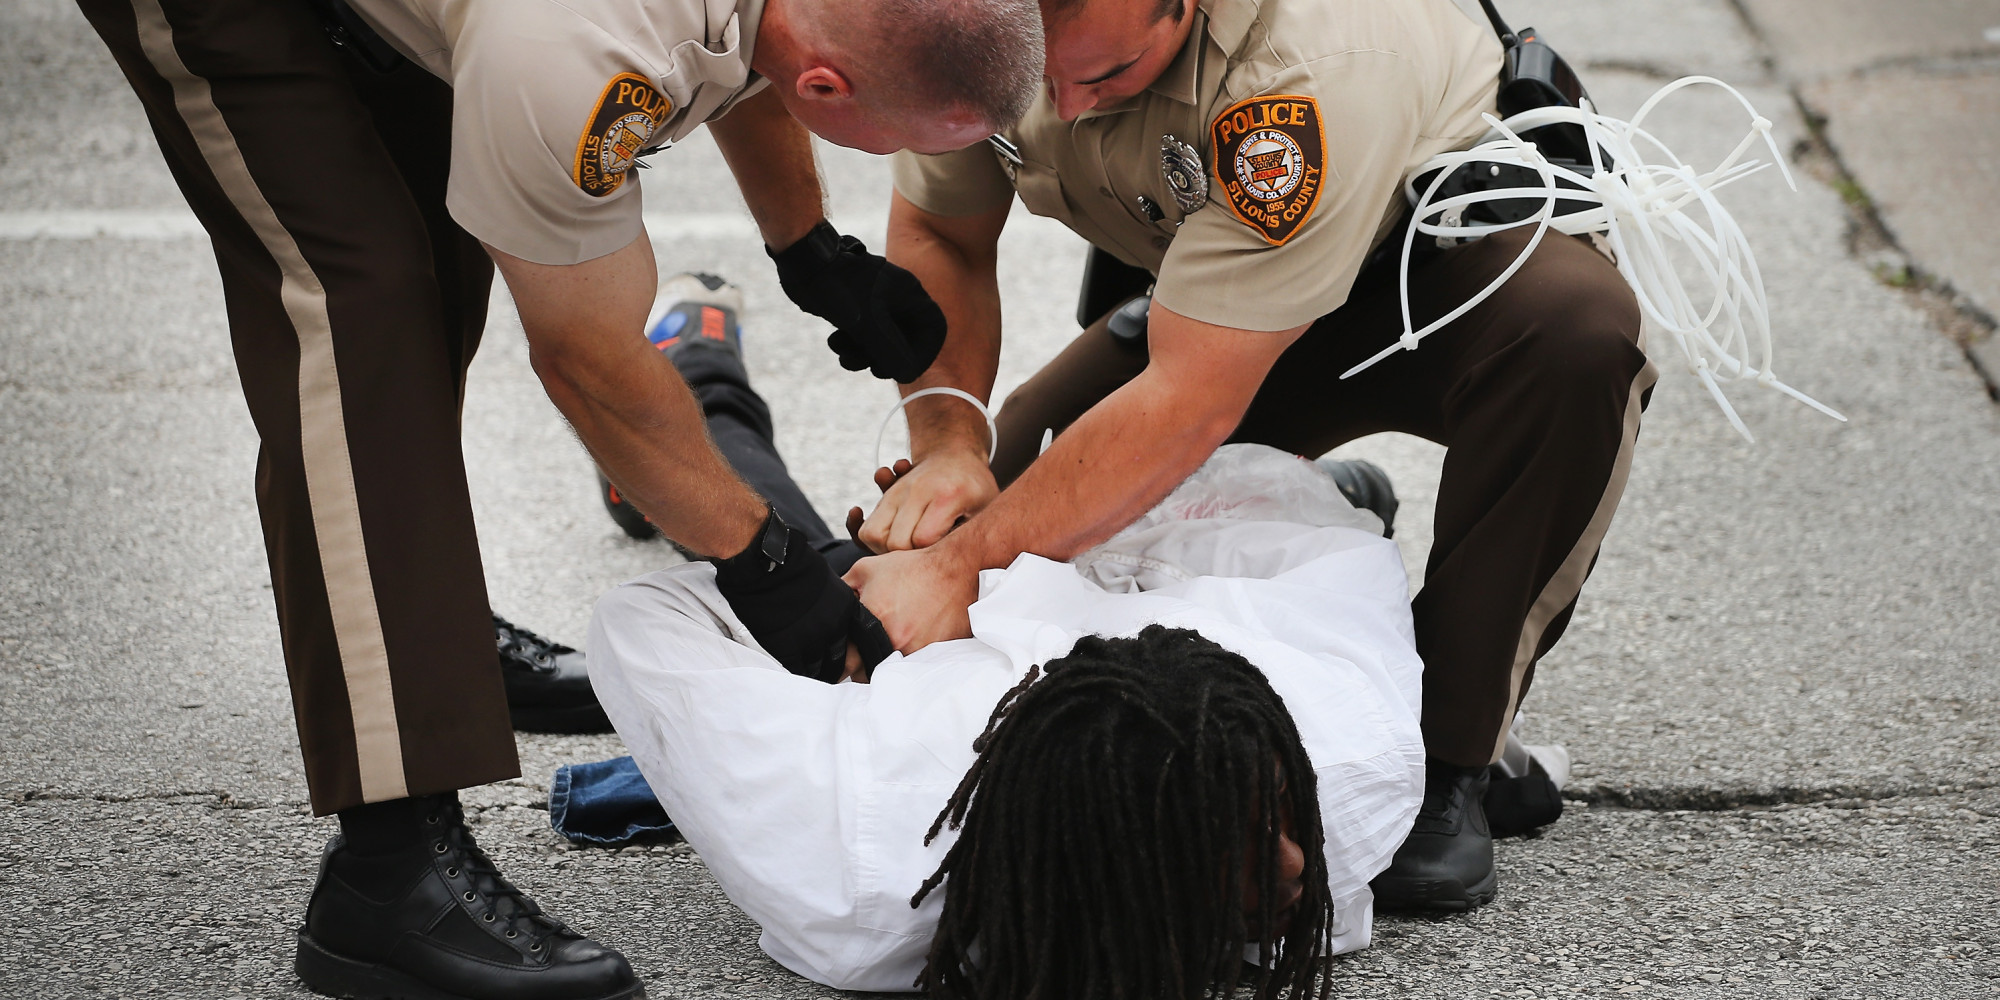 15 Most Outrageous Examples Of Police Misconduct In The DOJ Report On